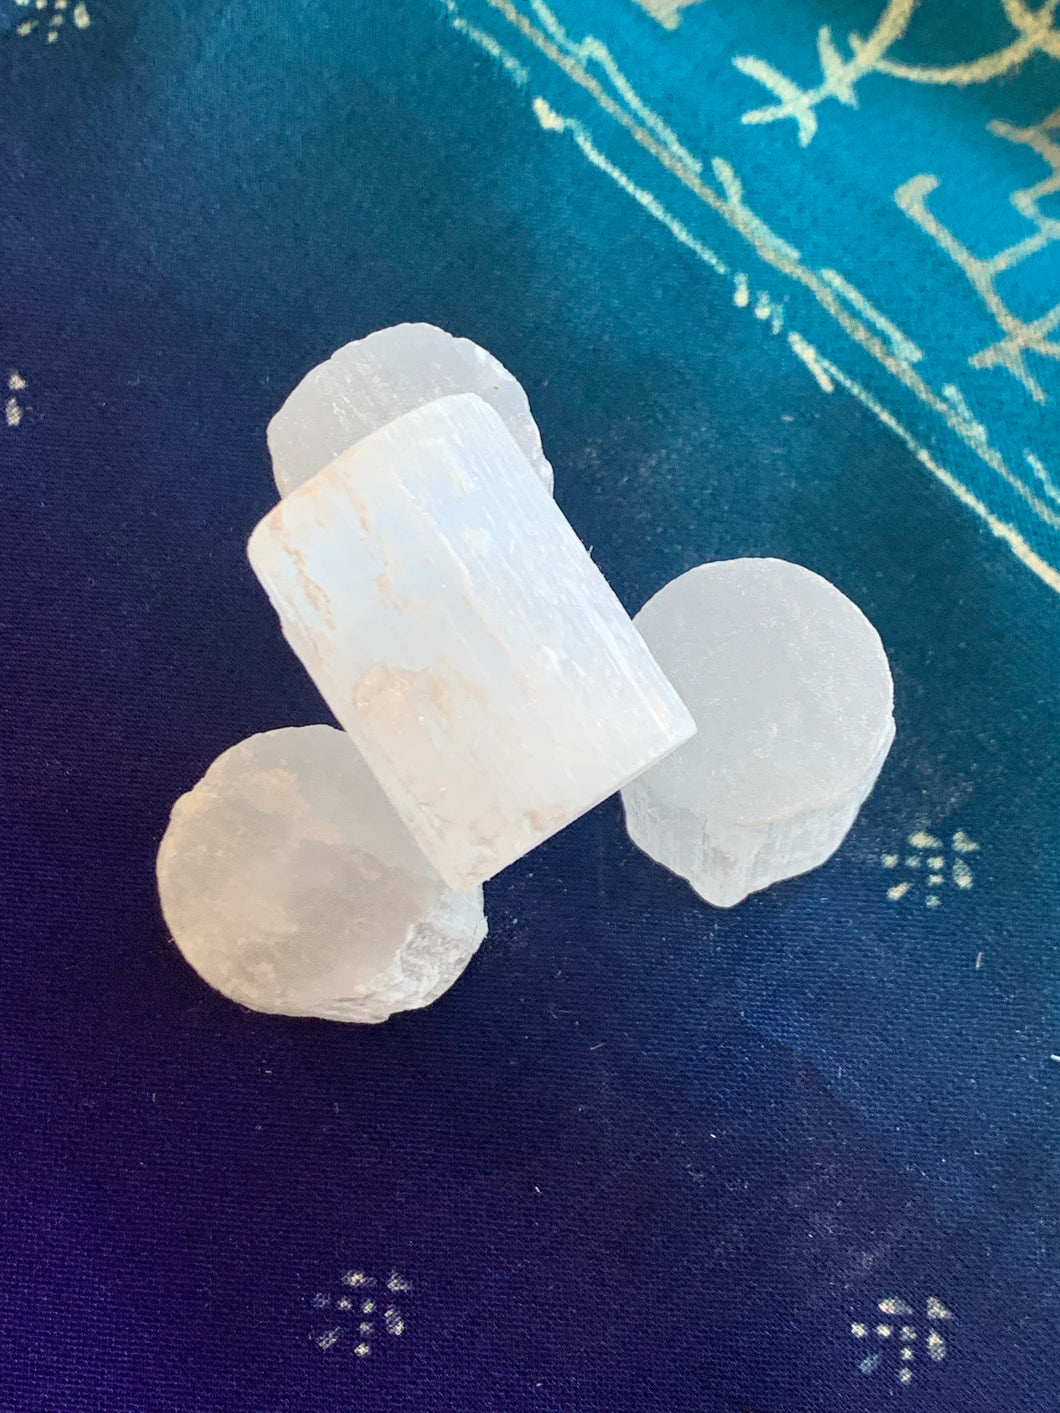 Selenite candy pieces